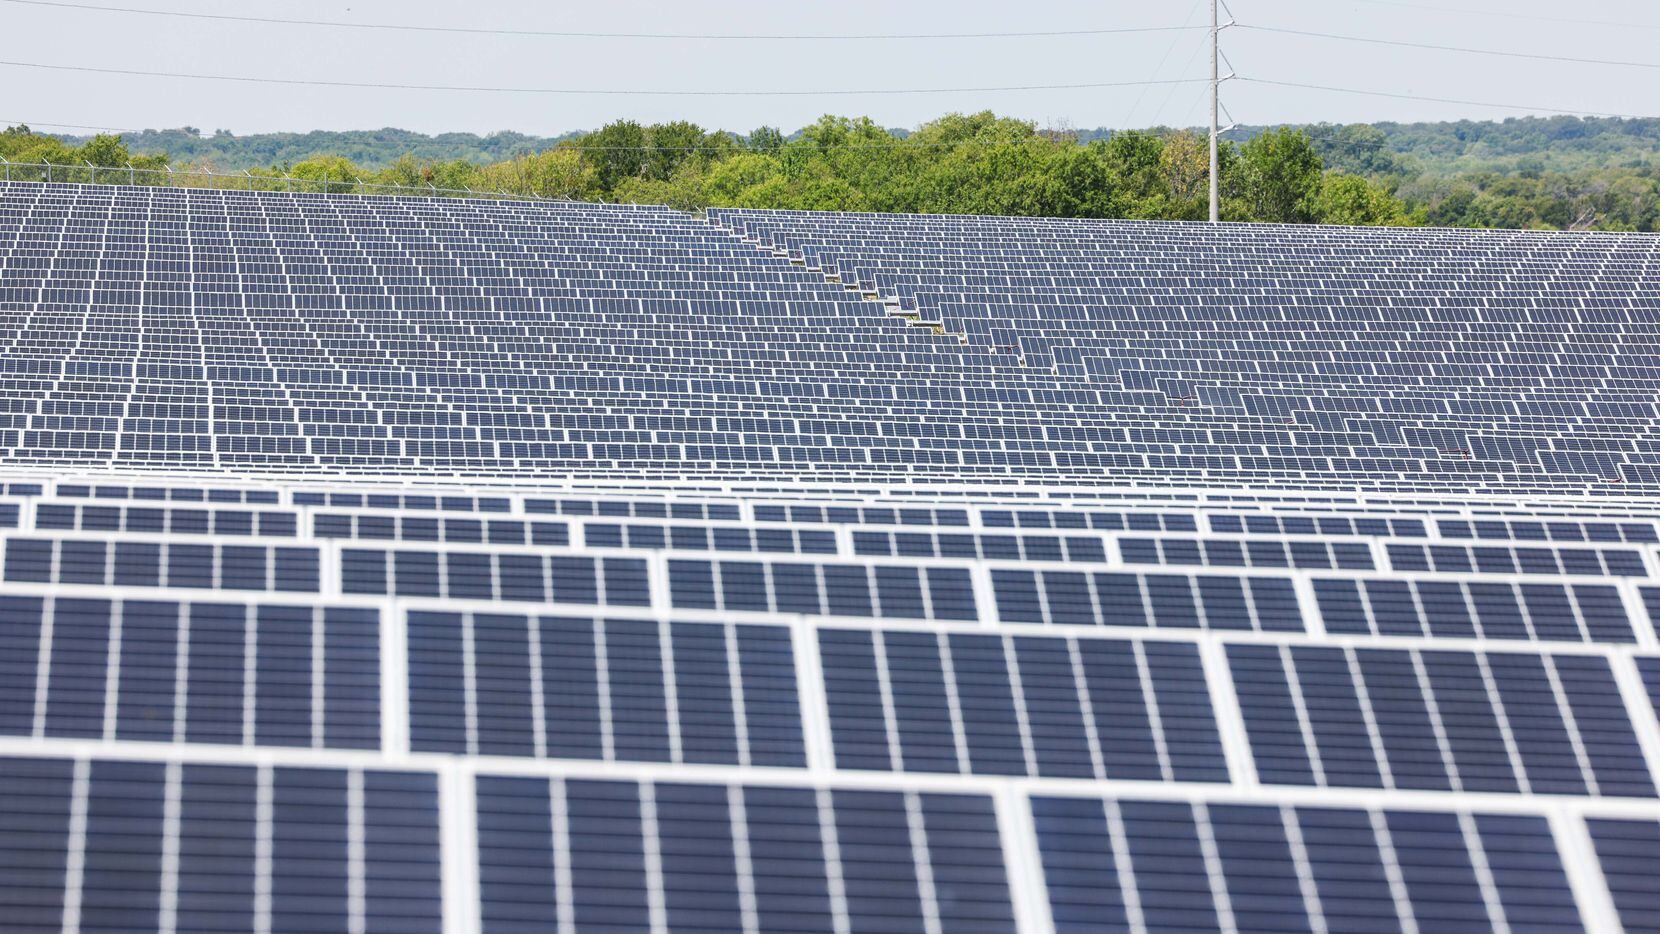 Solar panels at Lily Solar in Scurry, TX on Thursday, August 11, 2022.